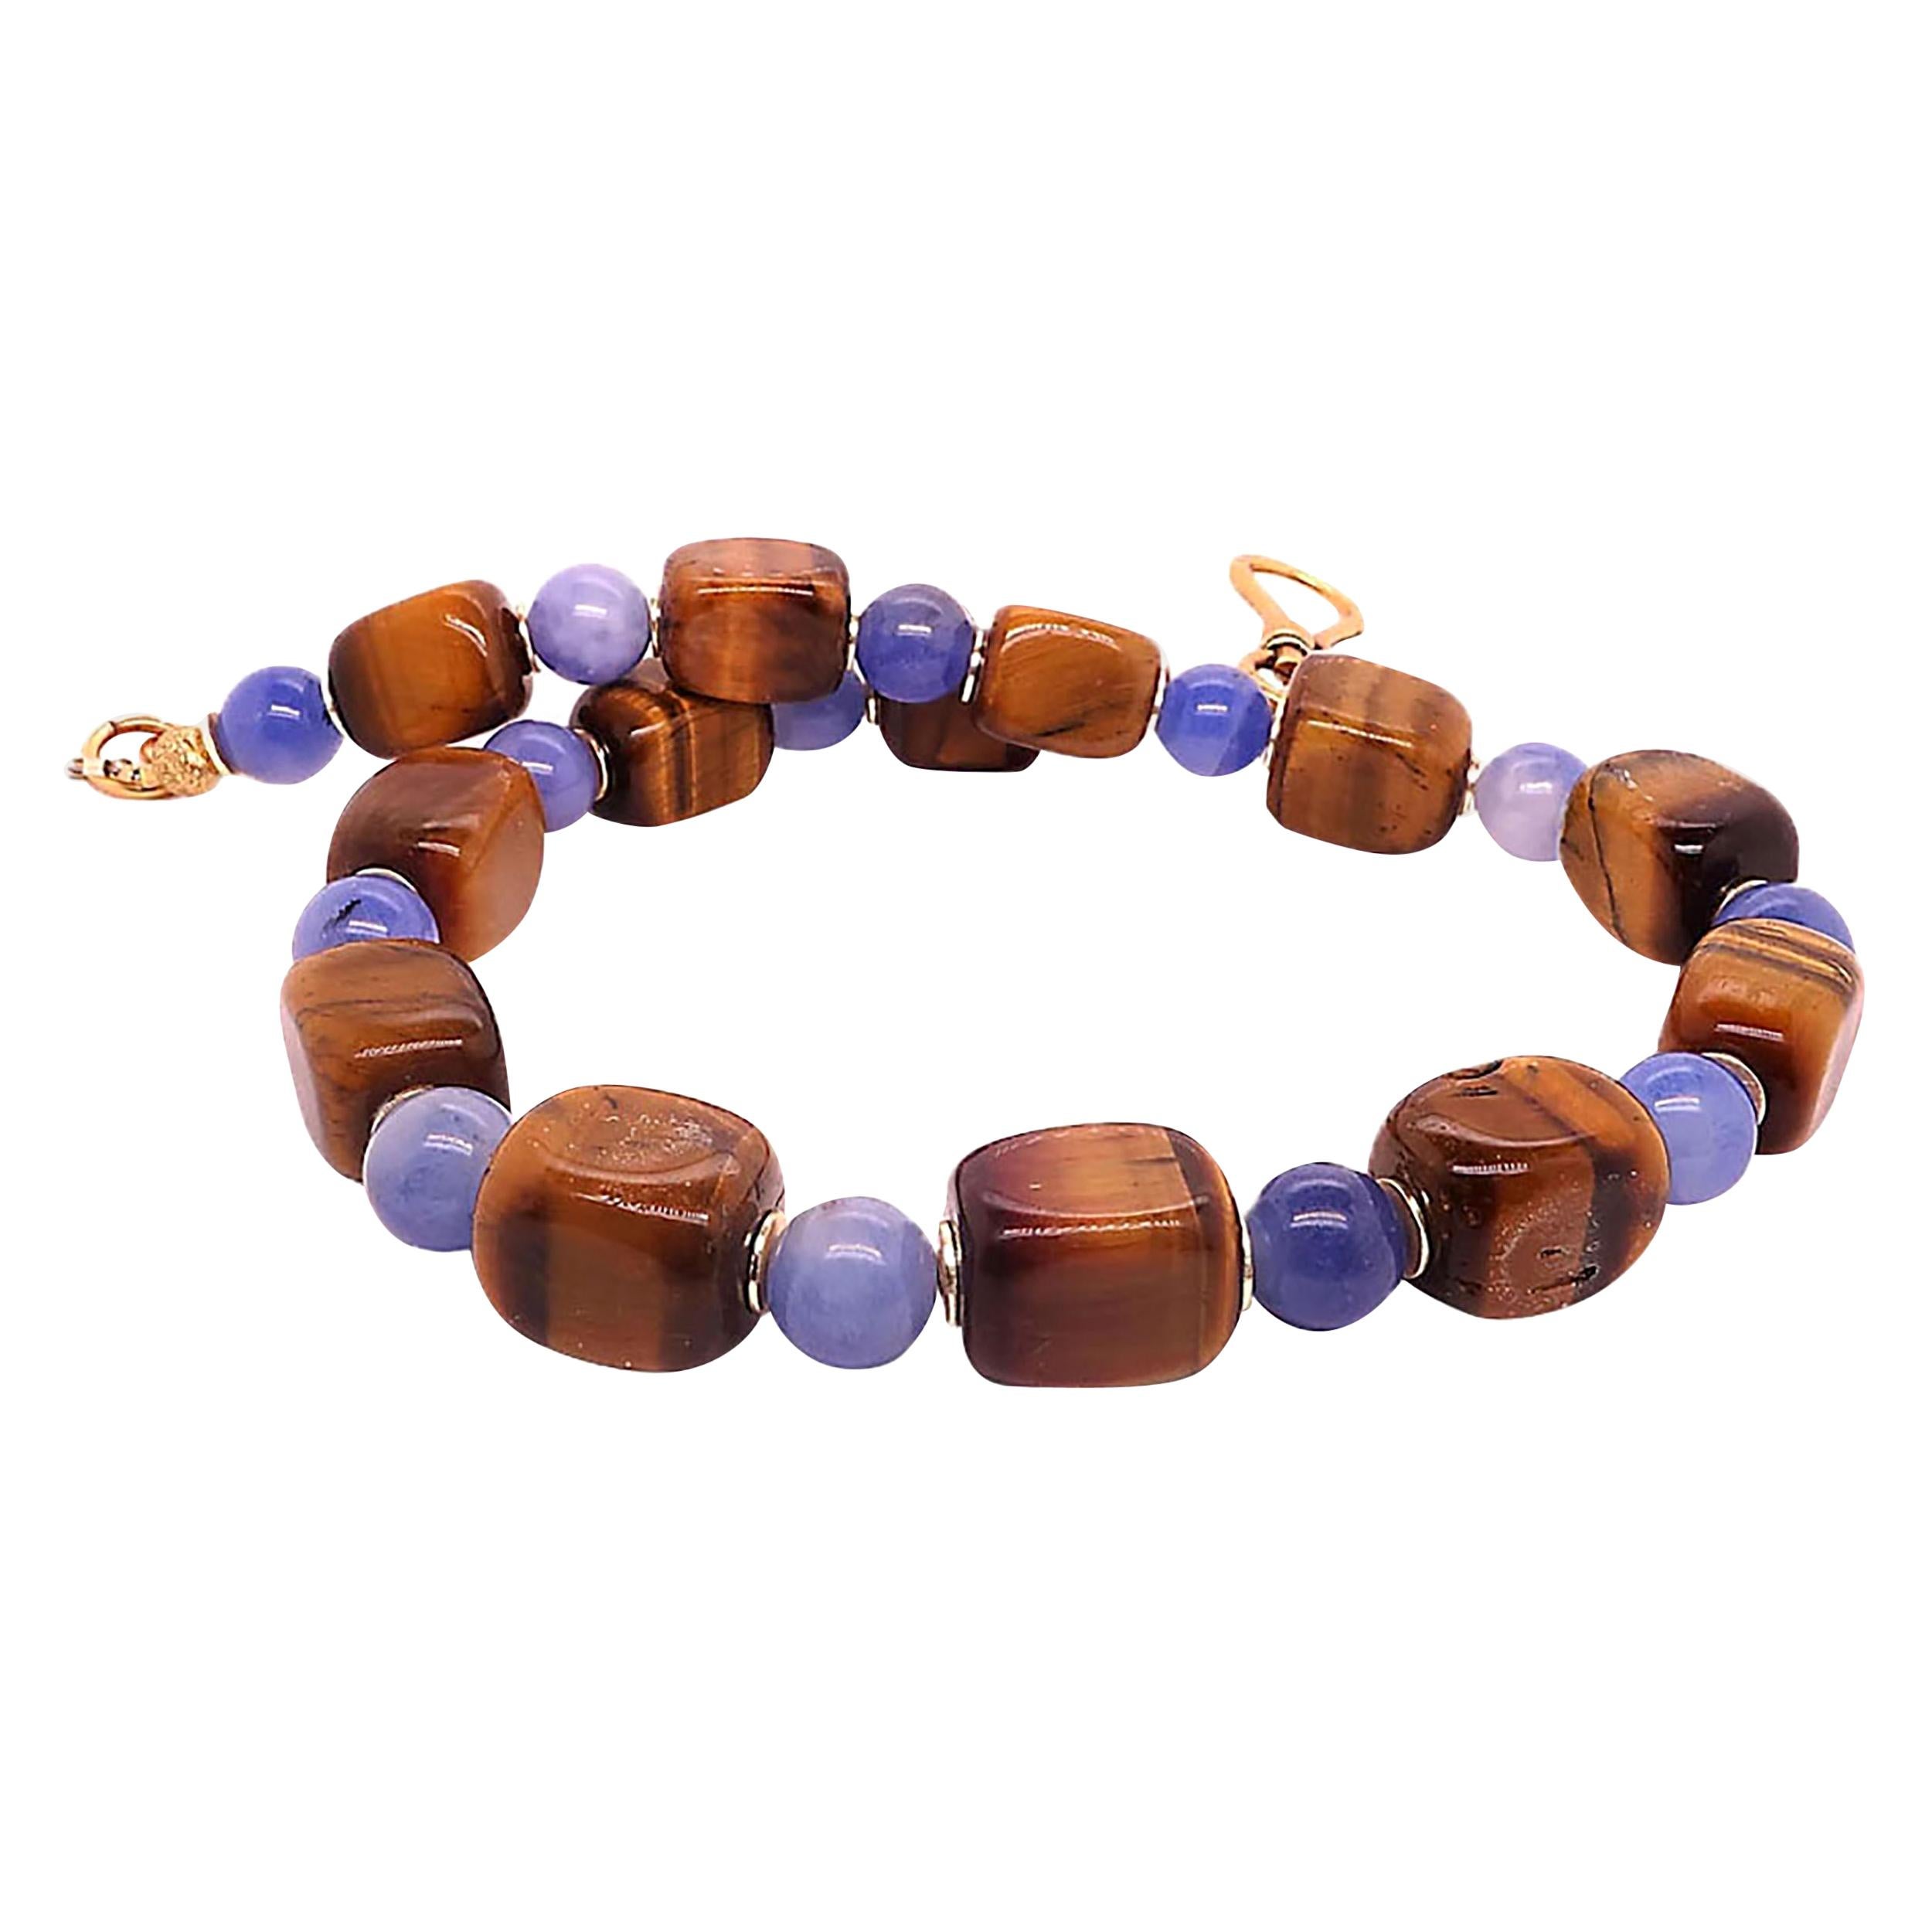 Artistic Autumn Tone Necklace of Tiger's Eye and Blue Agate